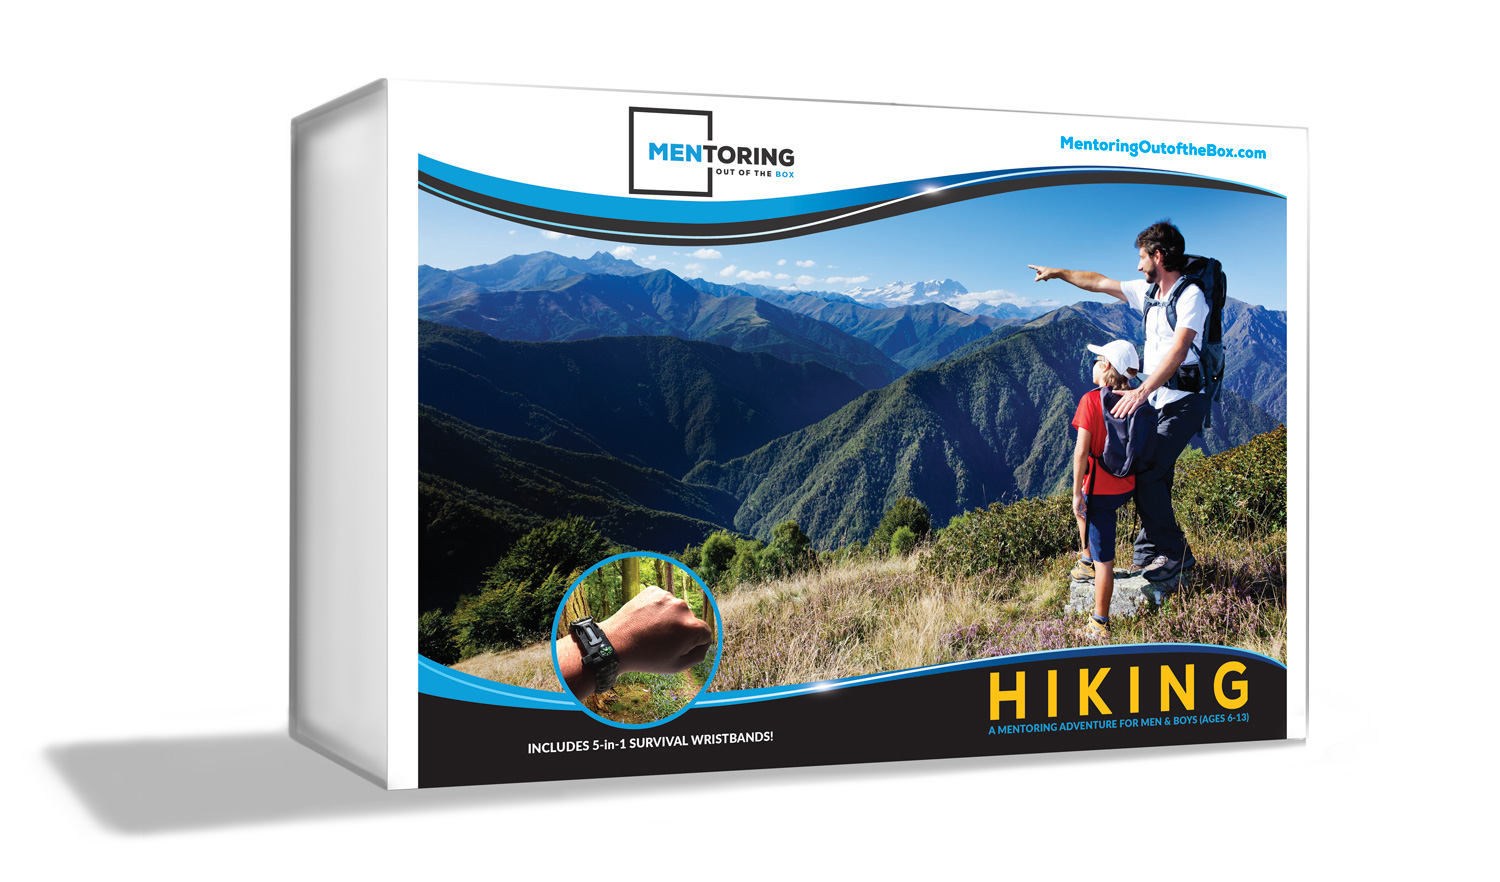 Mentoring Out of the Box - Hiking Kit